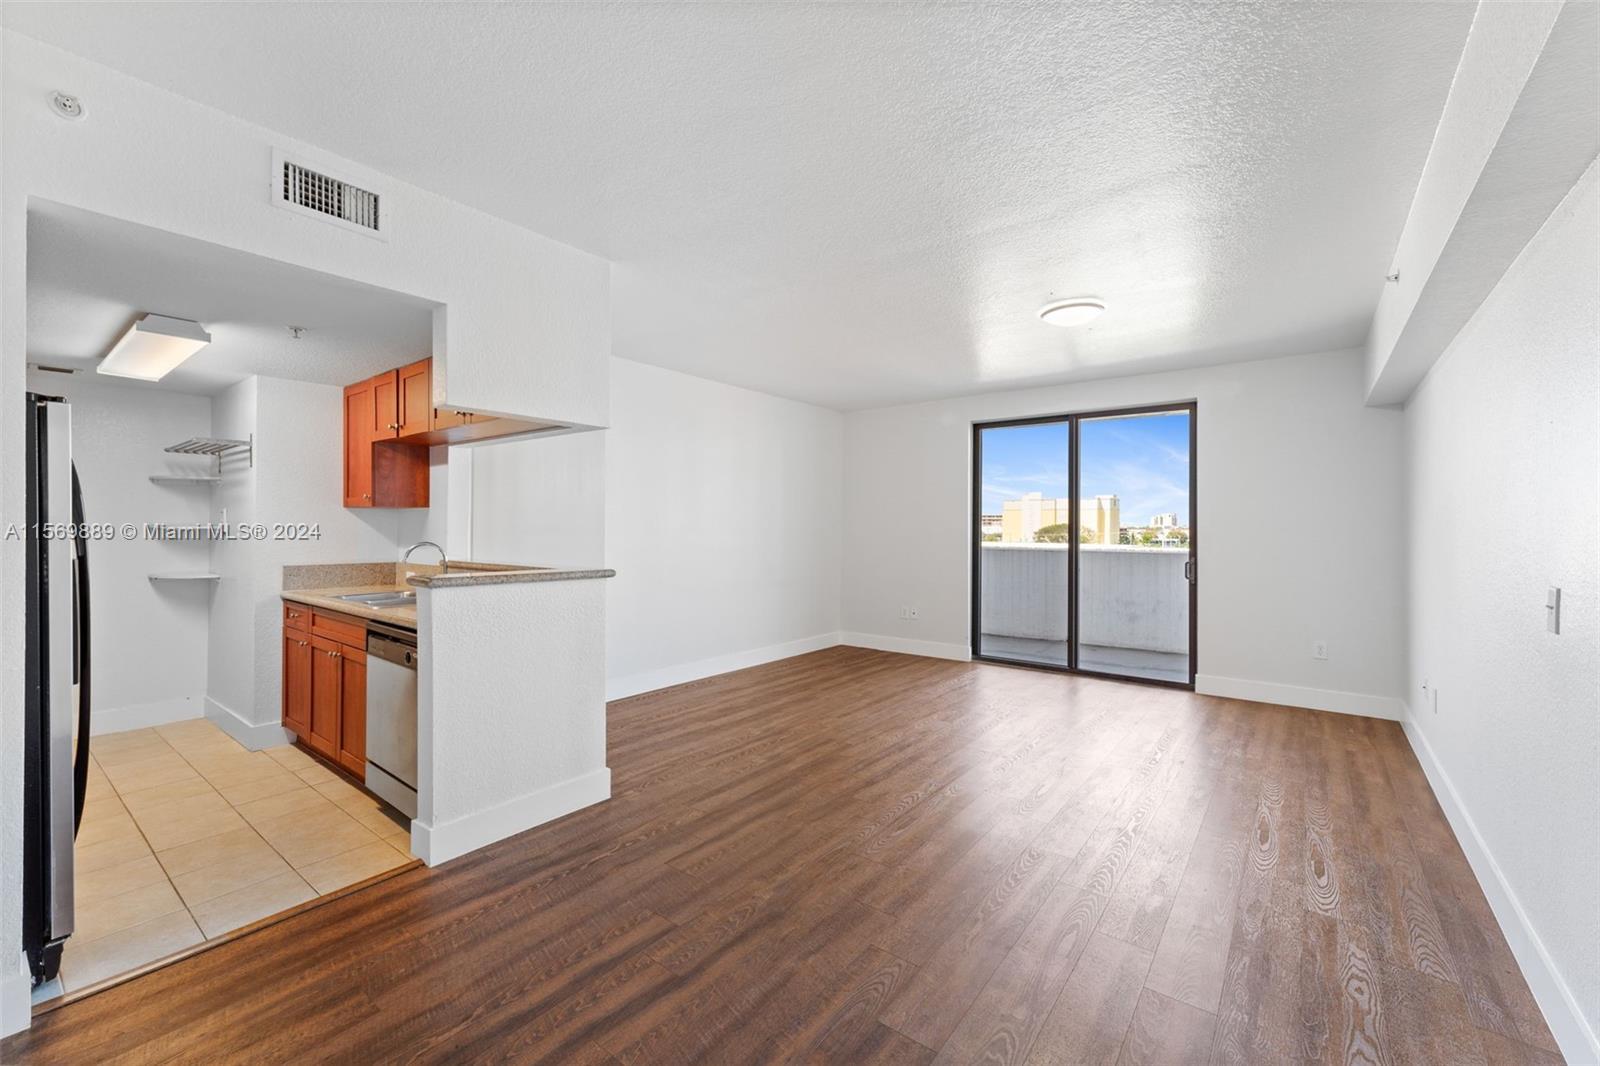 Photo of 36 NW 6th Ave #502 in Miami, FL